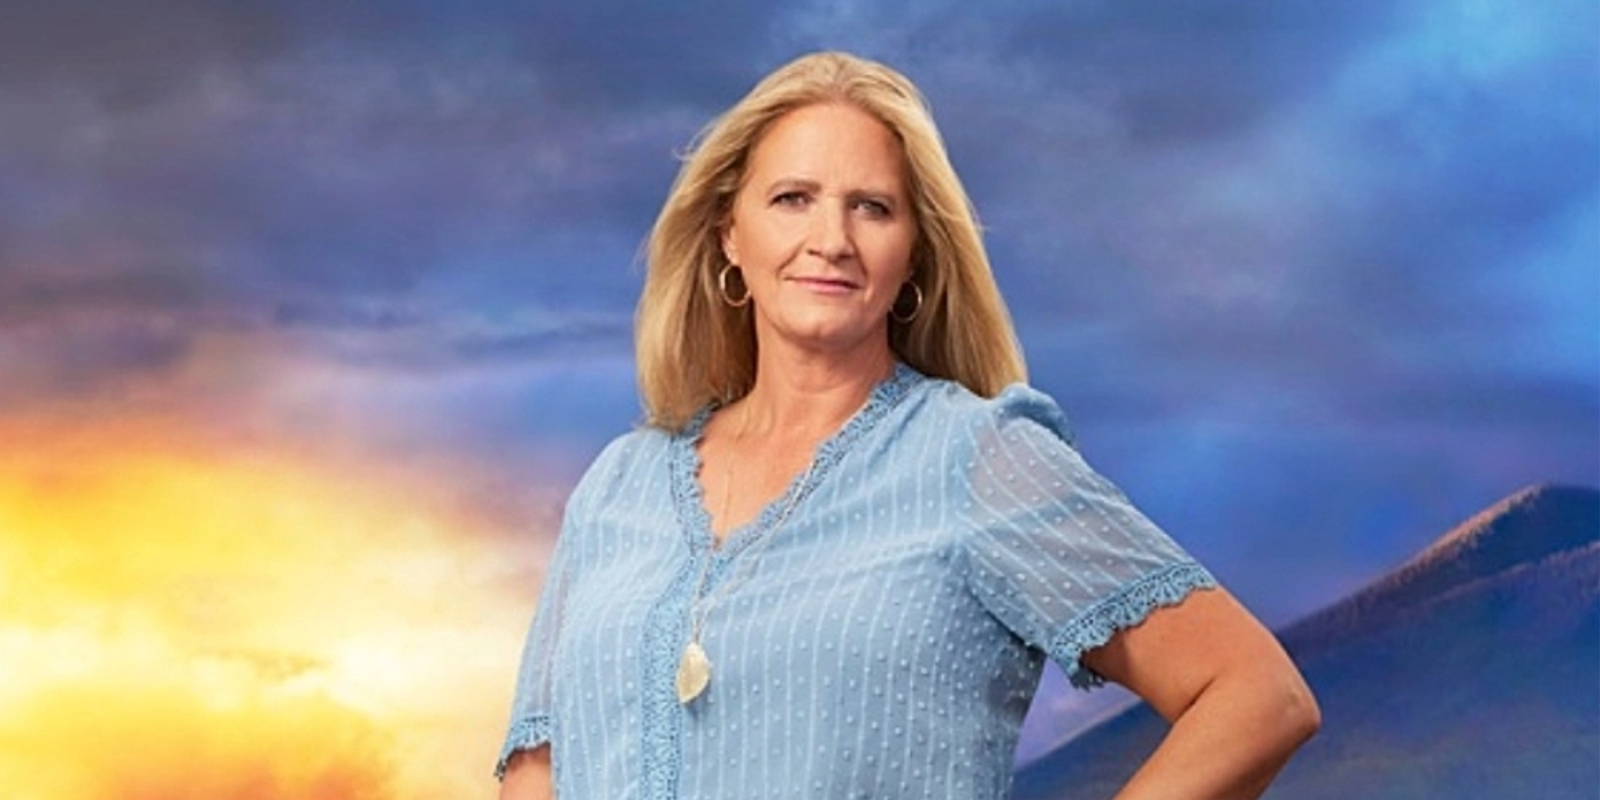 Christine Brown in a promotional photo for season 17 of TLC's 'Sister Wives.'